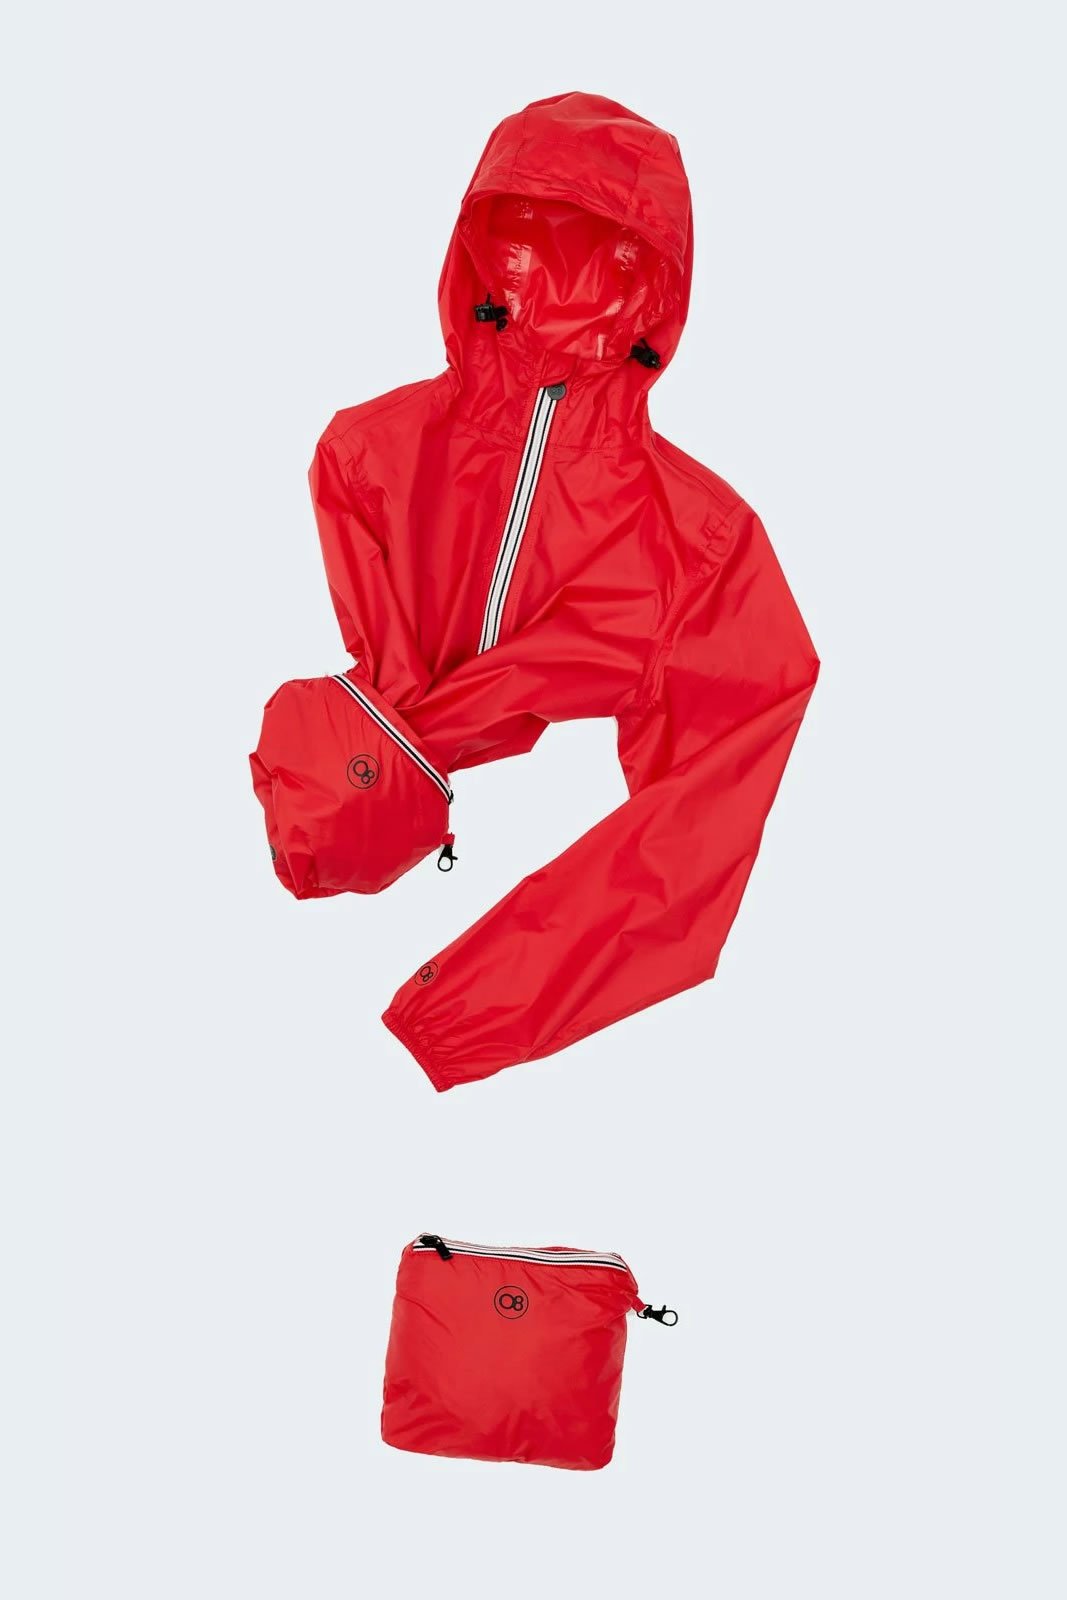 Picture of a Men's Full Zip Blue Waterproof Rain Jacket red color packing snapshot